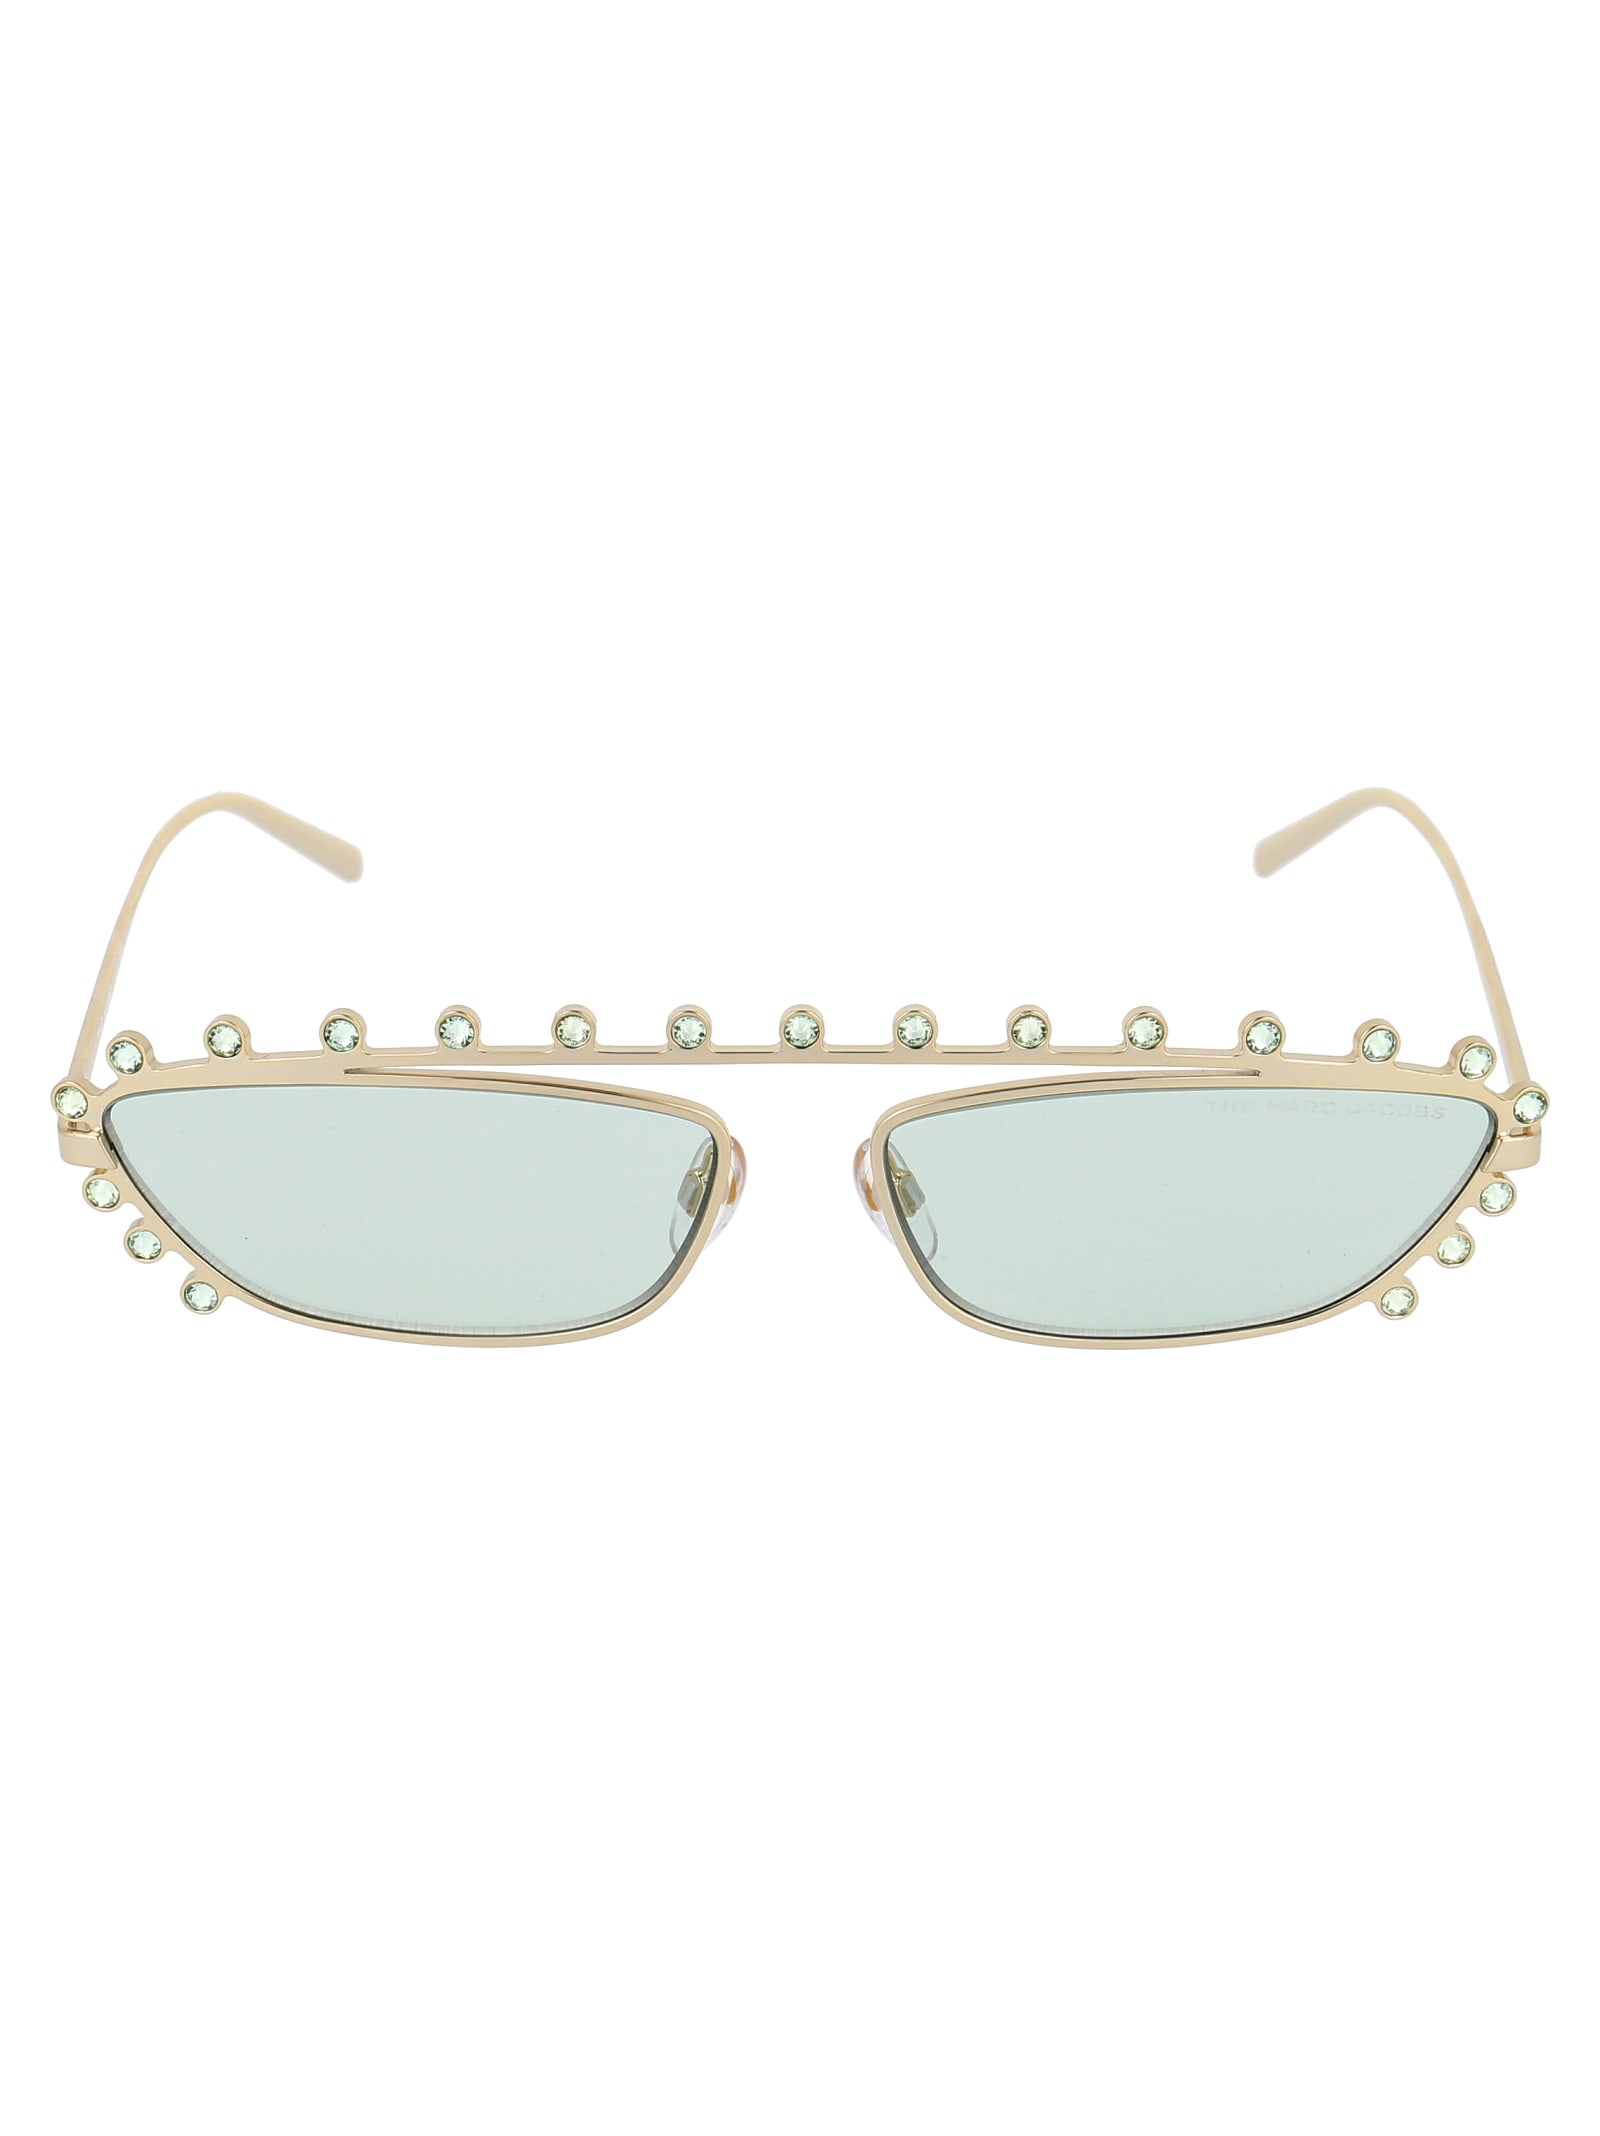 Marc Jacobs Sunglasses In Pefqt Gold Green